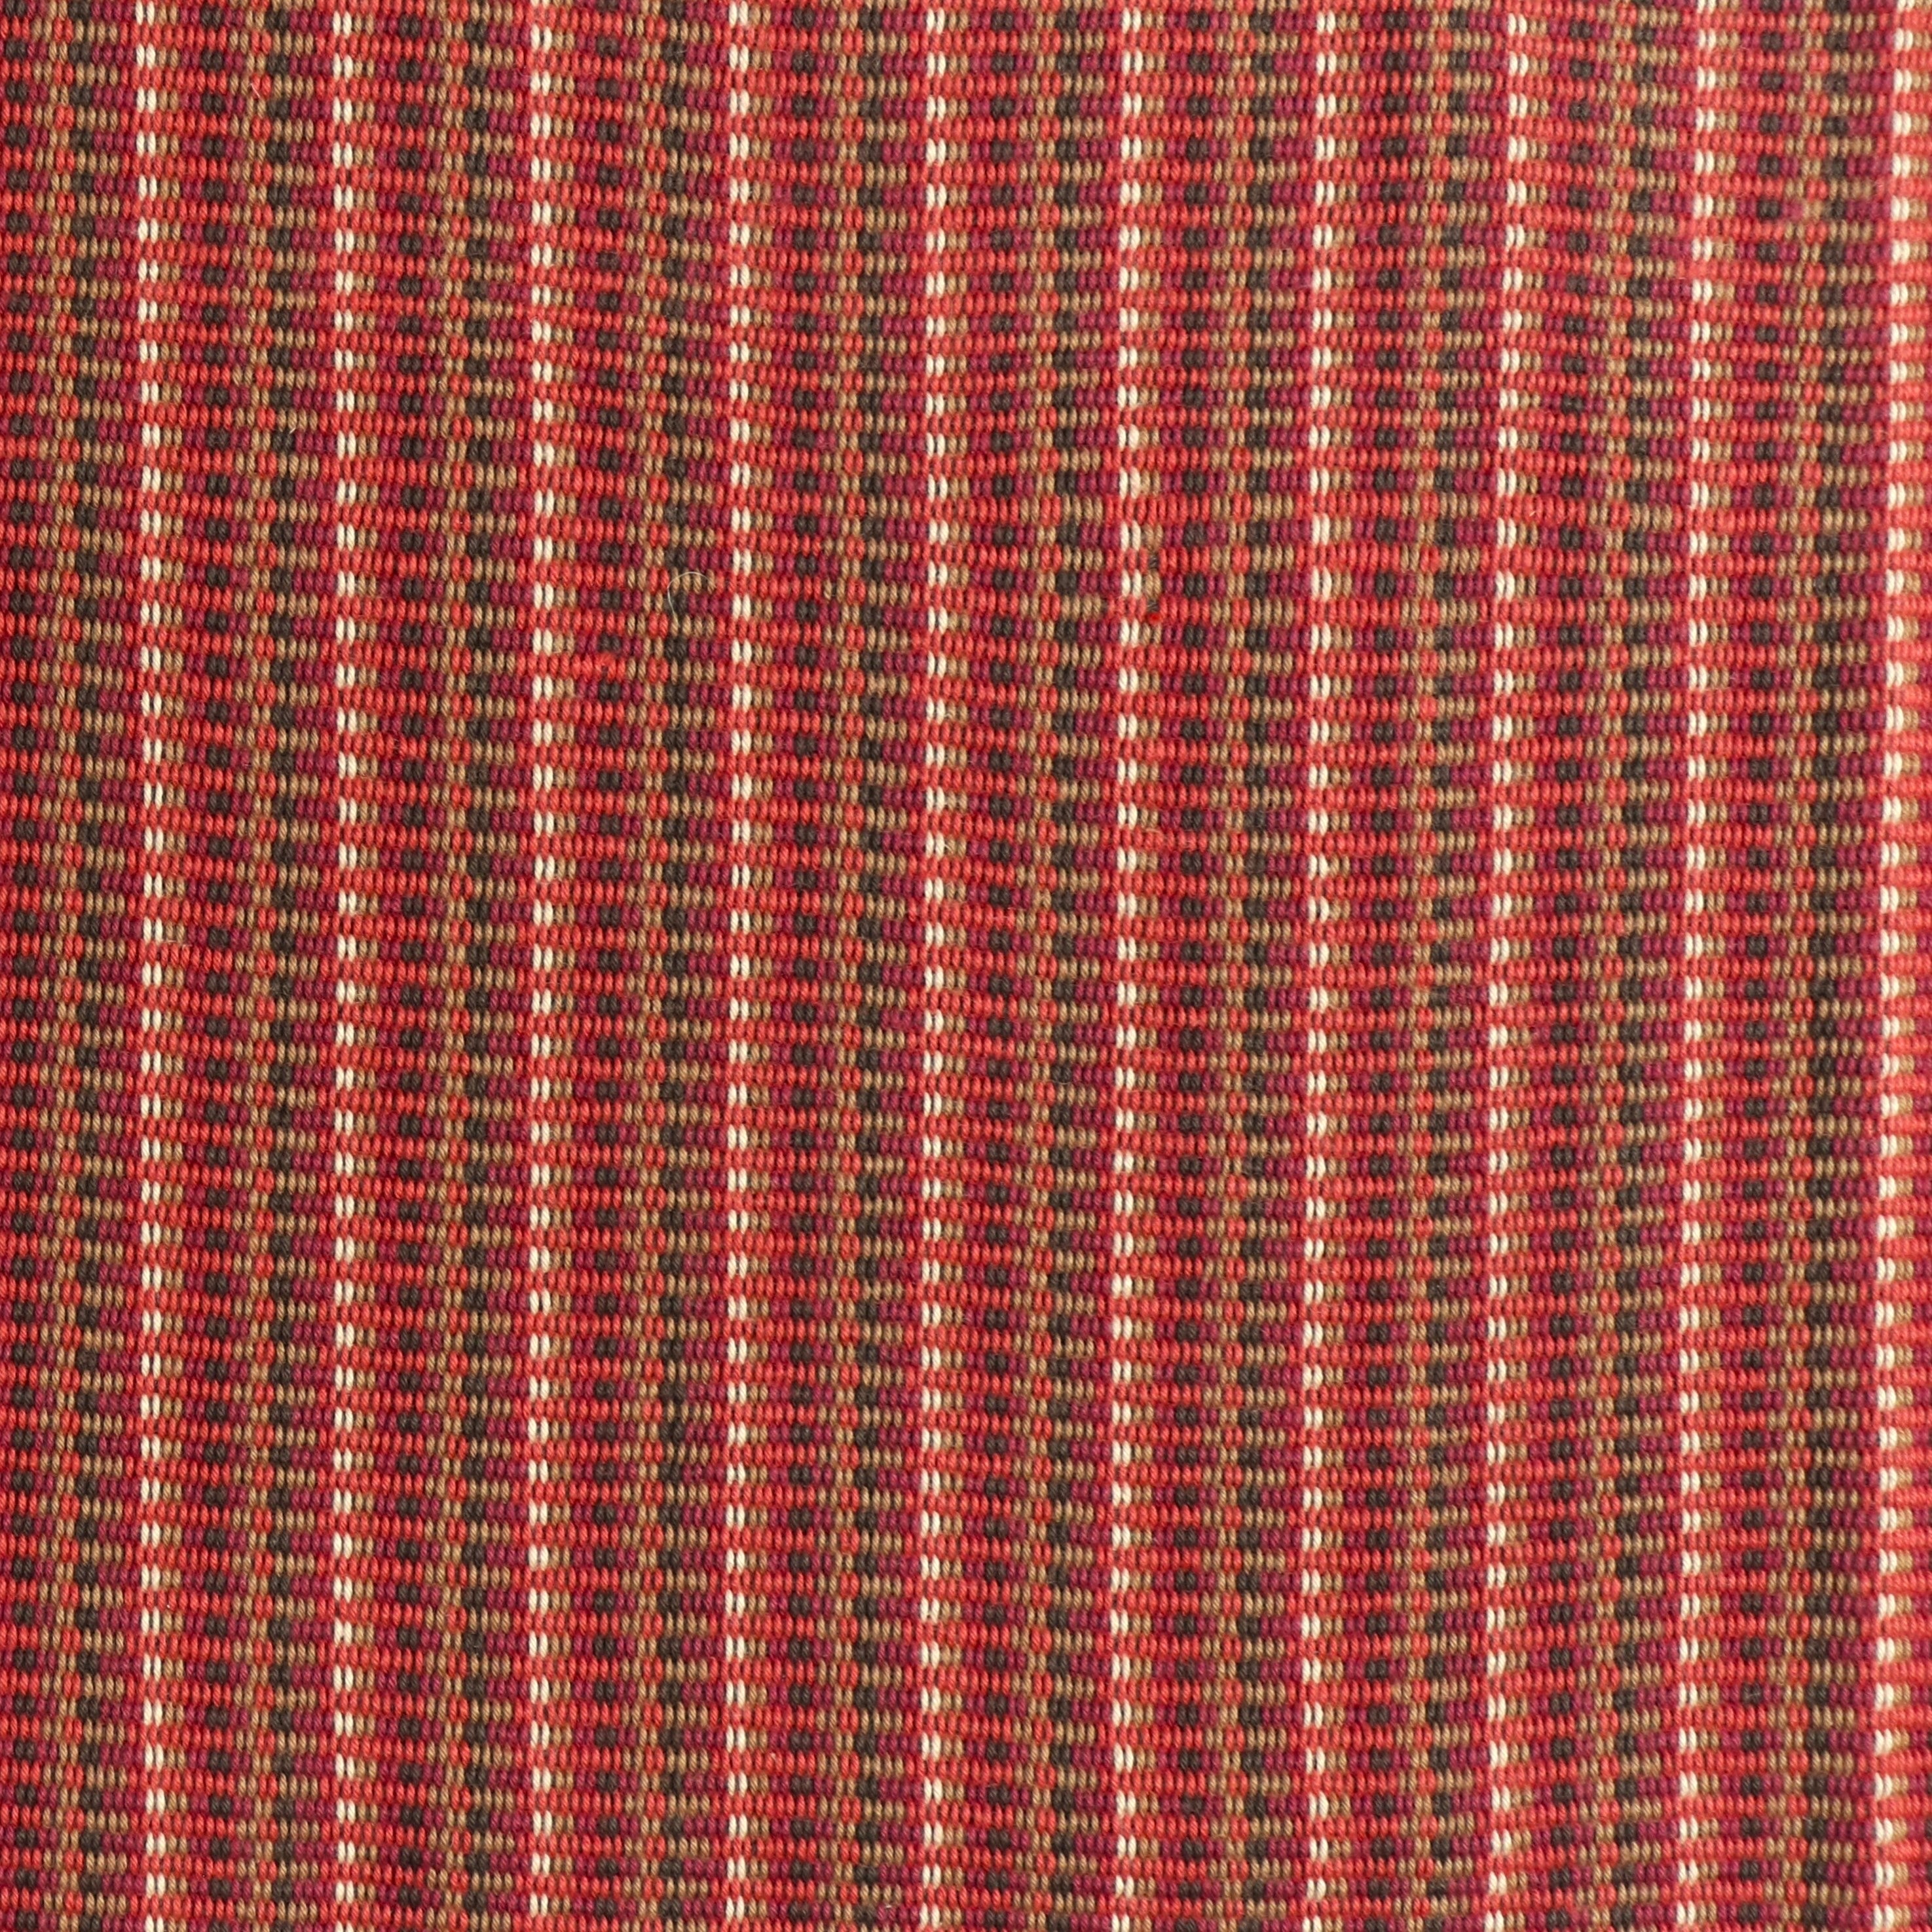 Detail of a hand-woven cotton fabric in an intricate stripe pattern in shades of red, maroon, navy and tan.